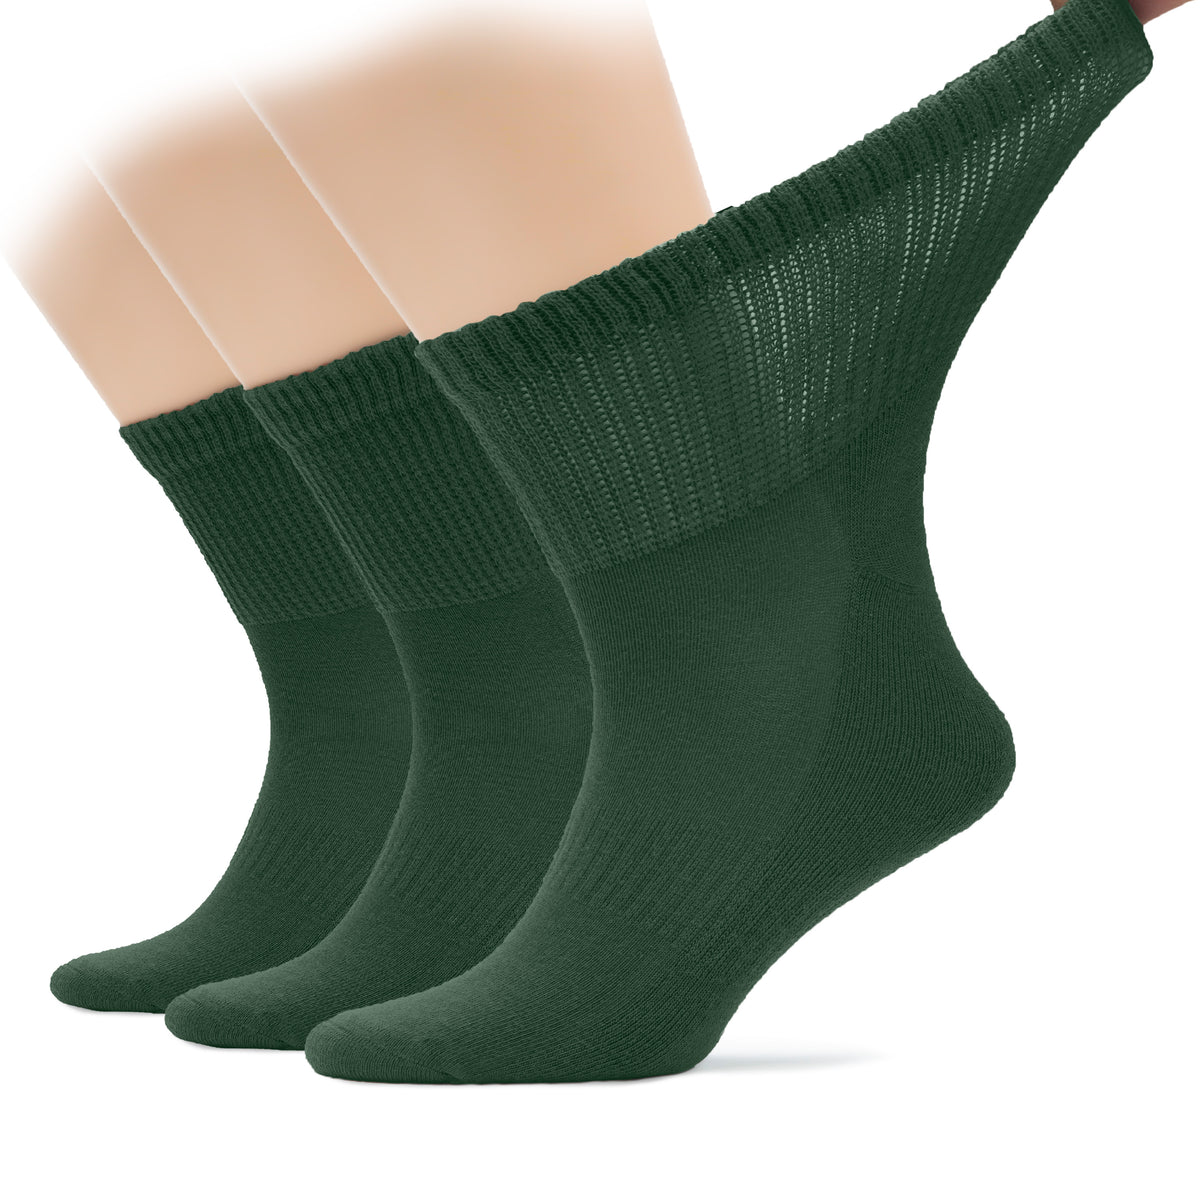 Three pairs of Men's Diabetic Ankle Socks in green, with one pair on each foot, designed for comfort and support.